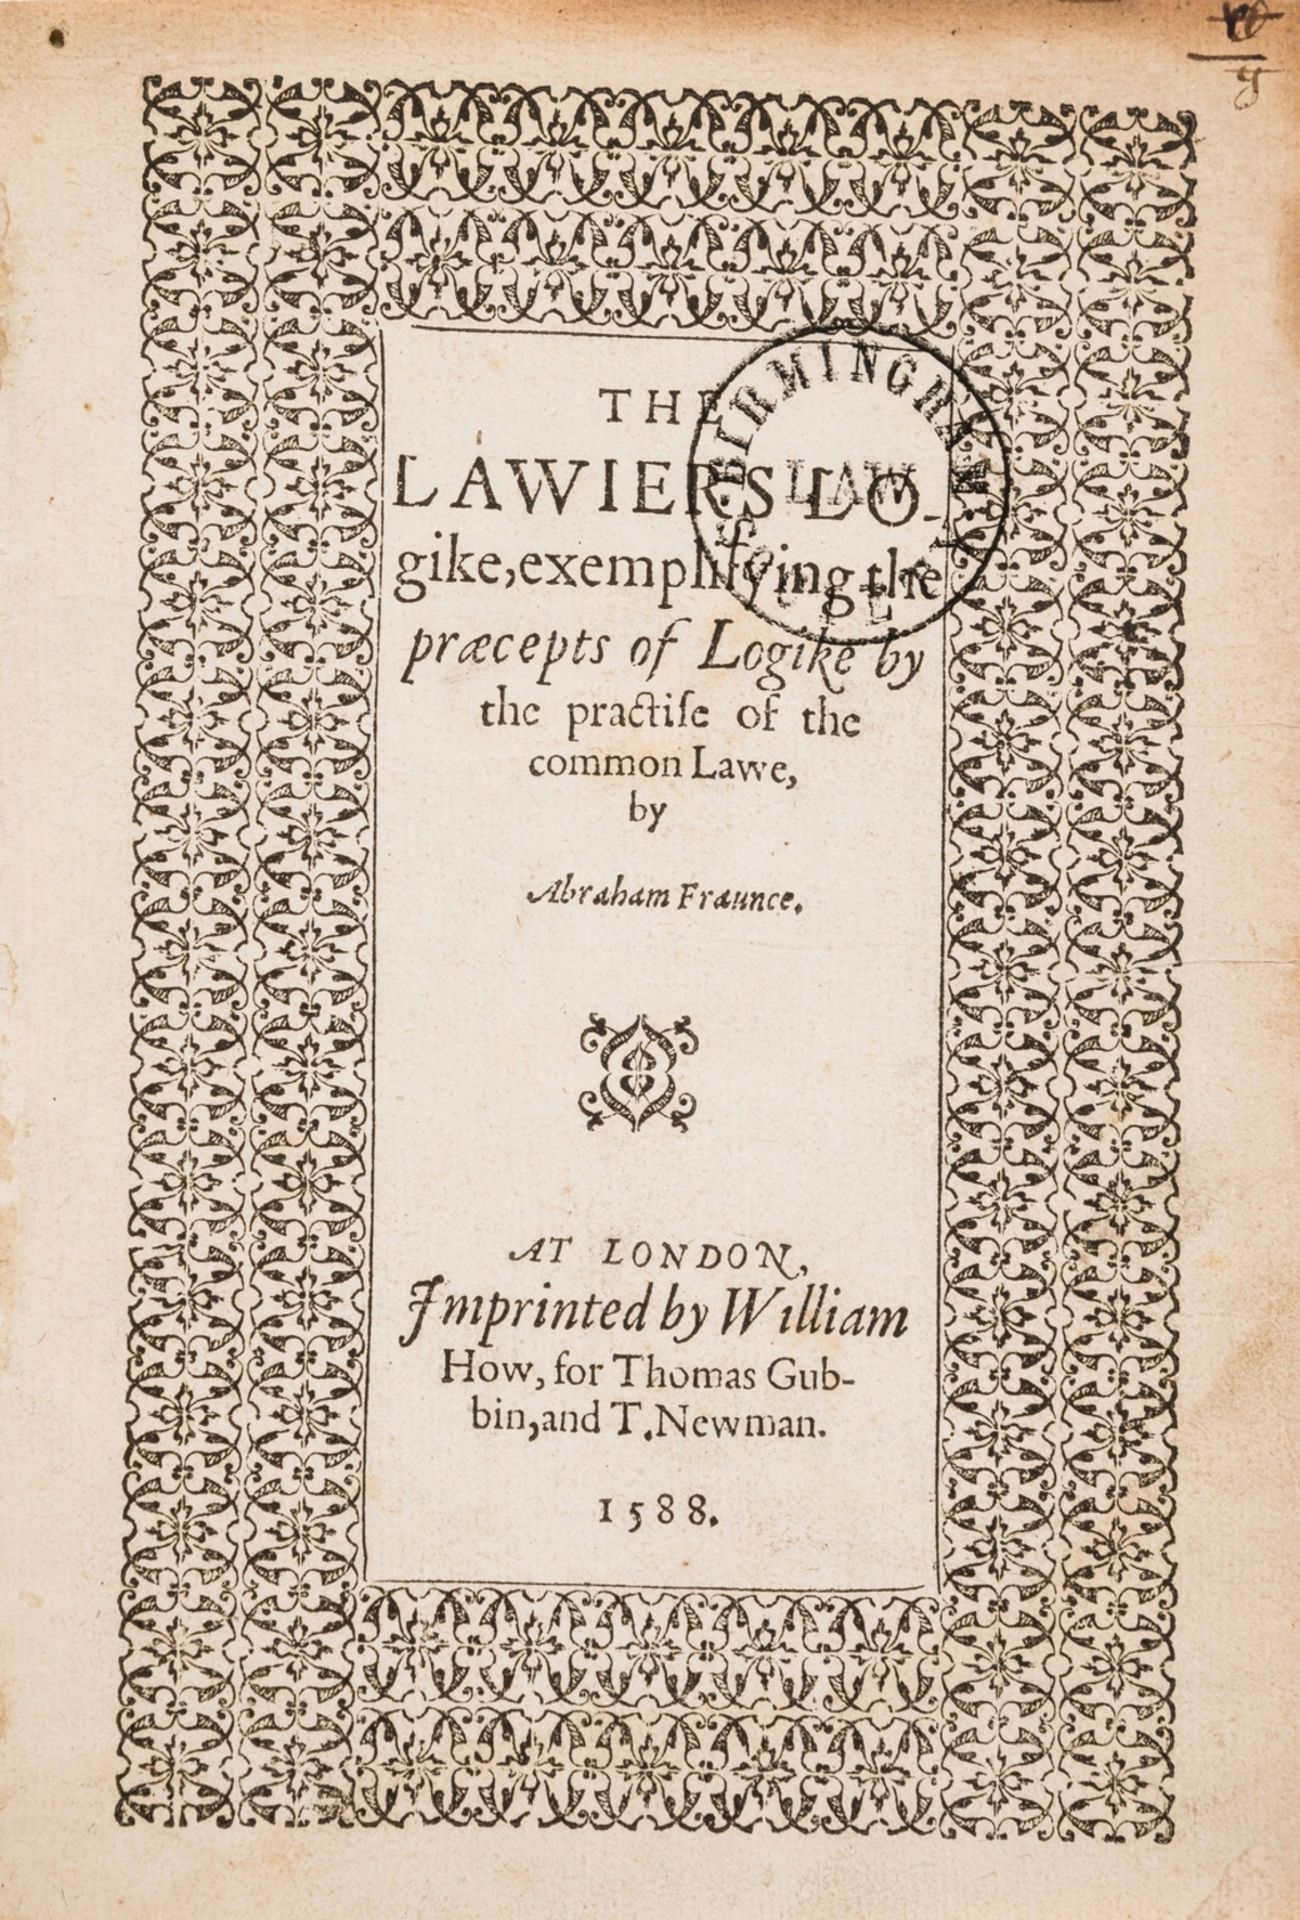 Shakespeare source book.- Fraunce (Abraham) The Lawiers Logike, exemplifying the praecepts of …